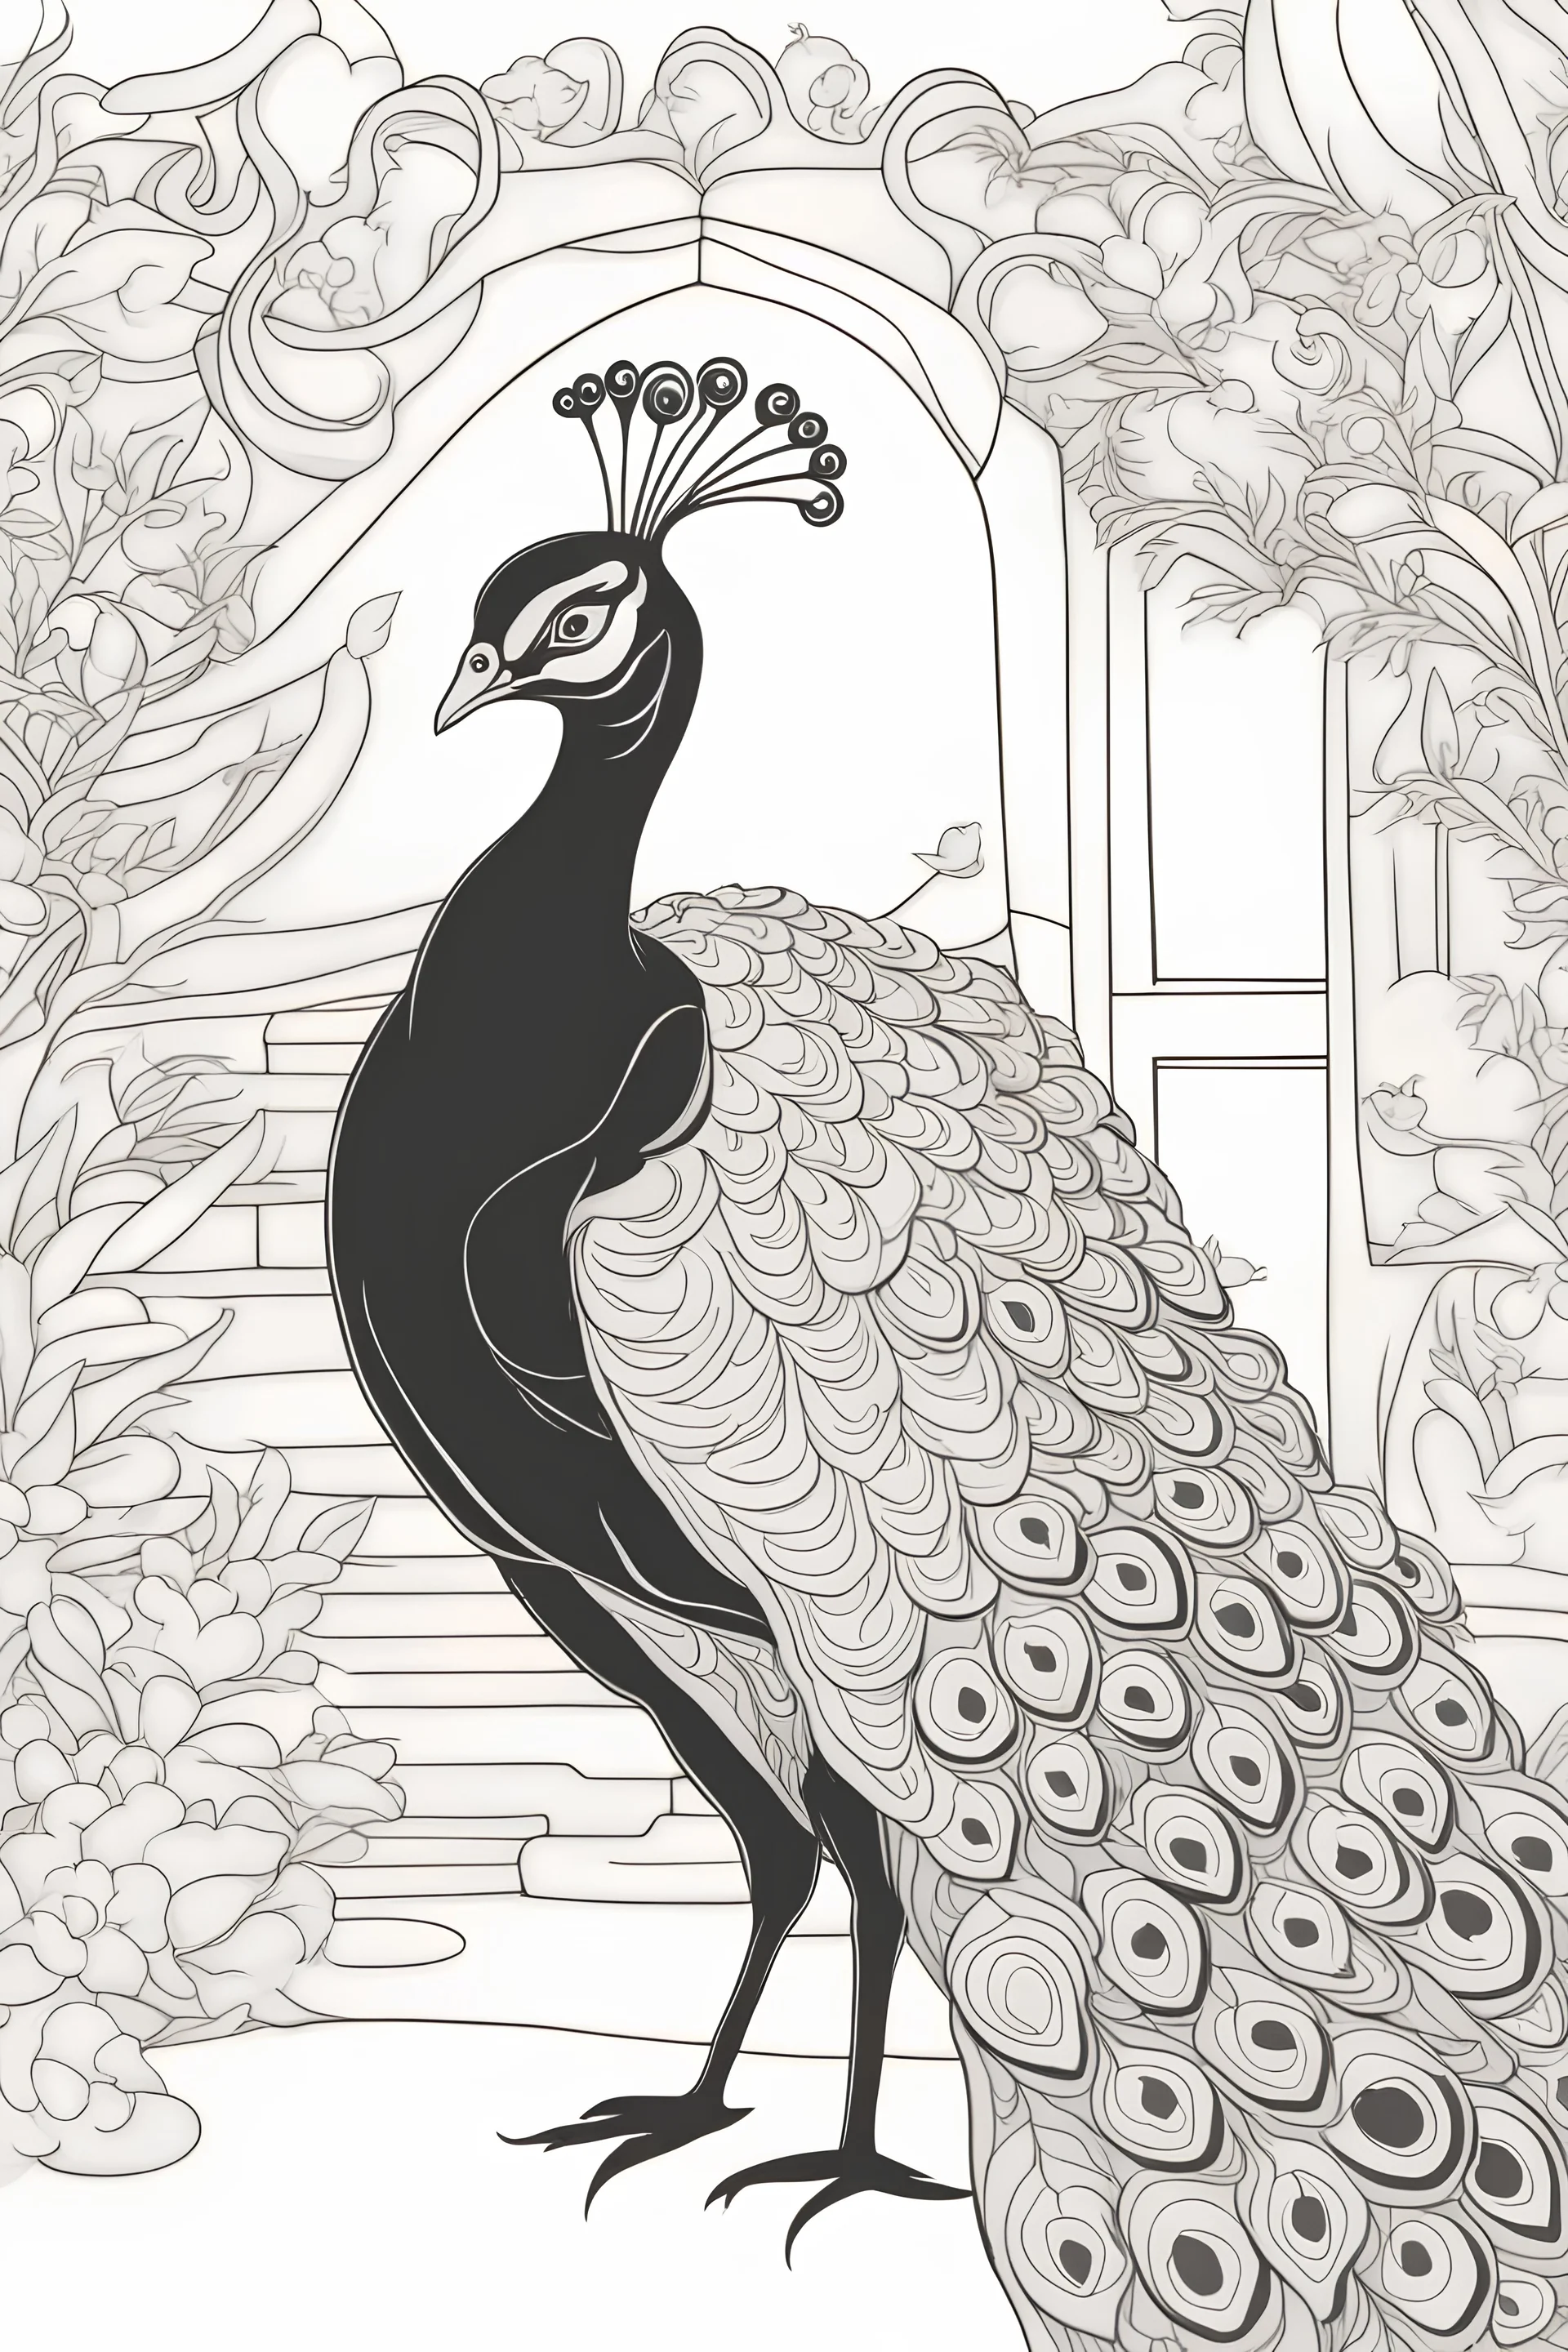 Free PEACOCK Coloring Pages for Download (Printable PDF) - VerbNow